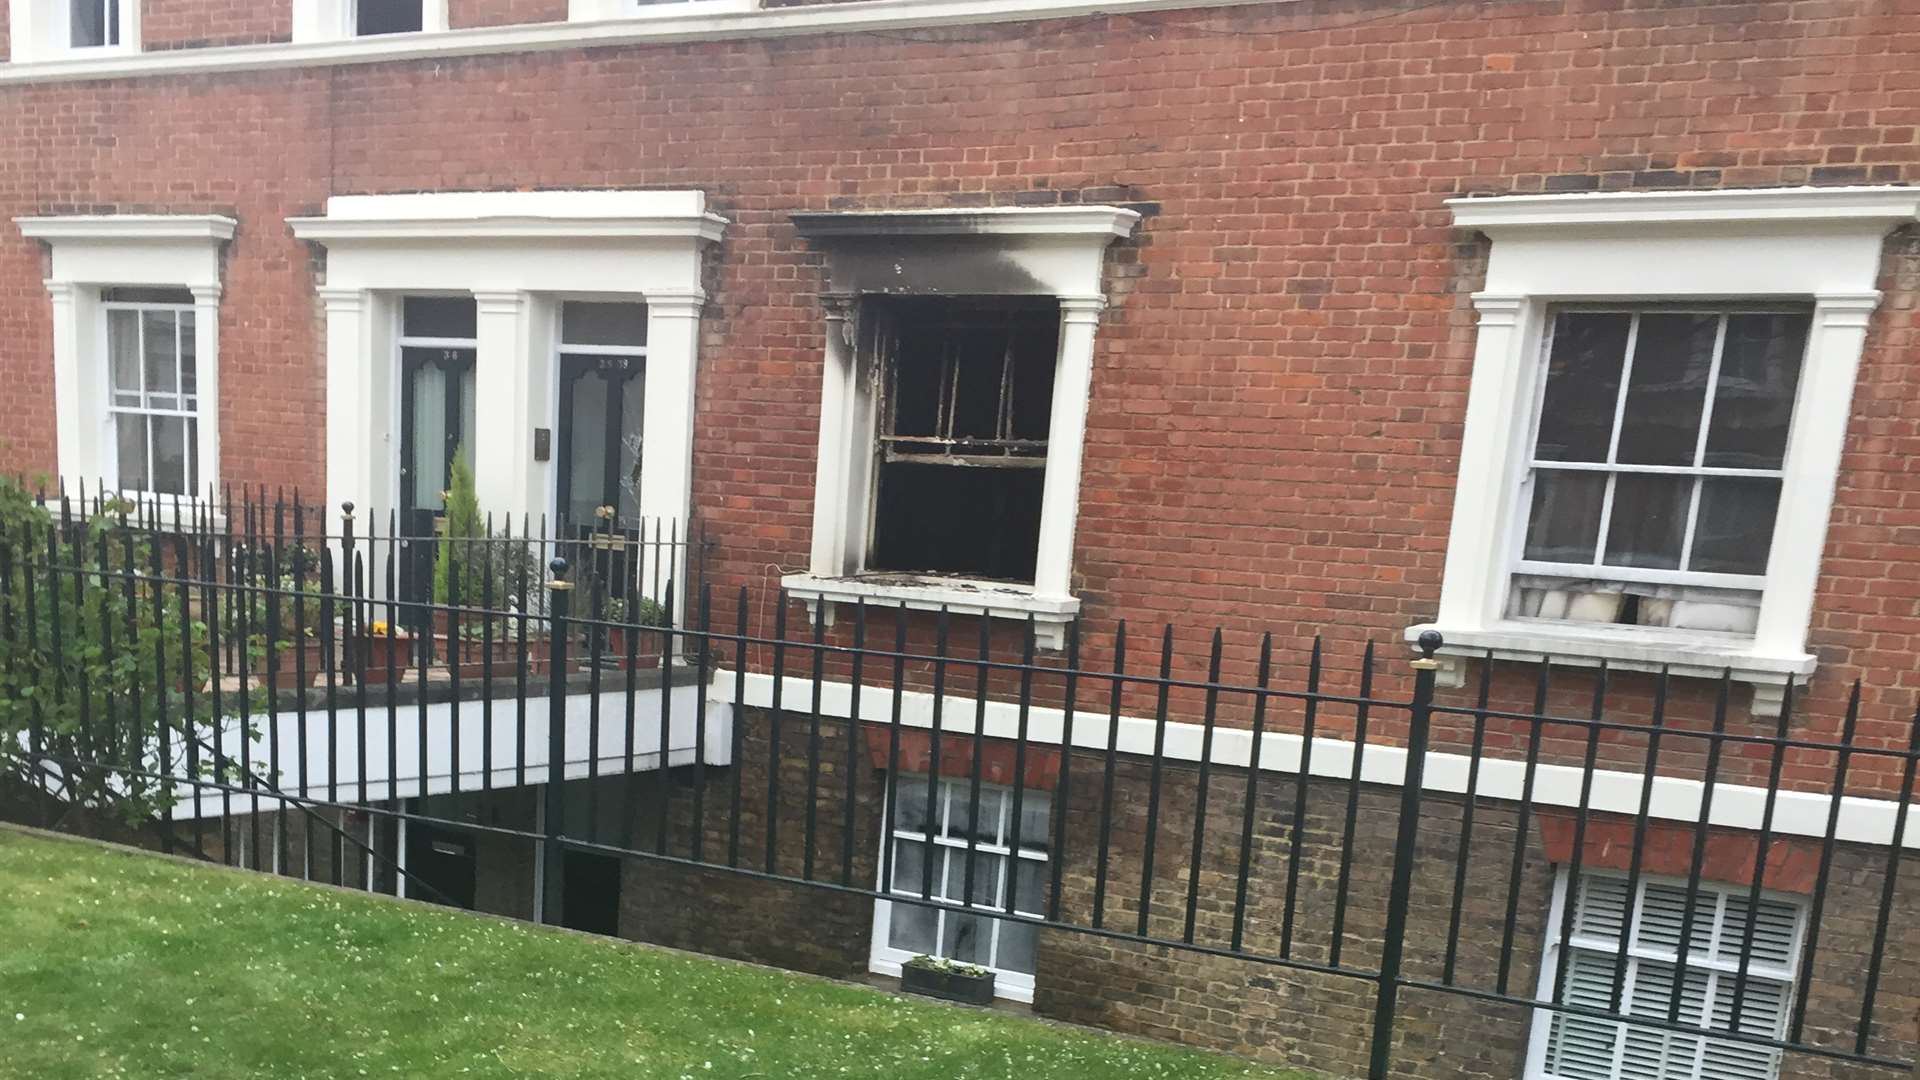 The fire broke out in a ground floor flat